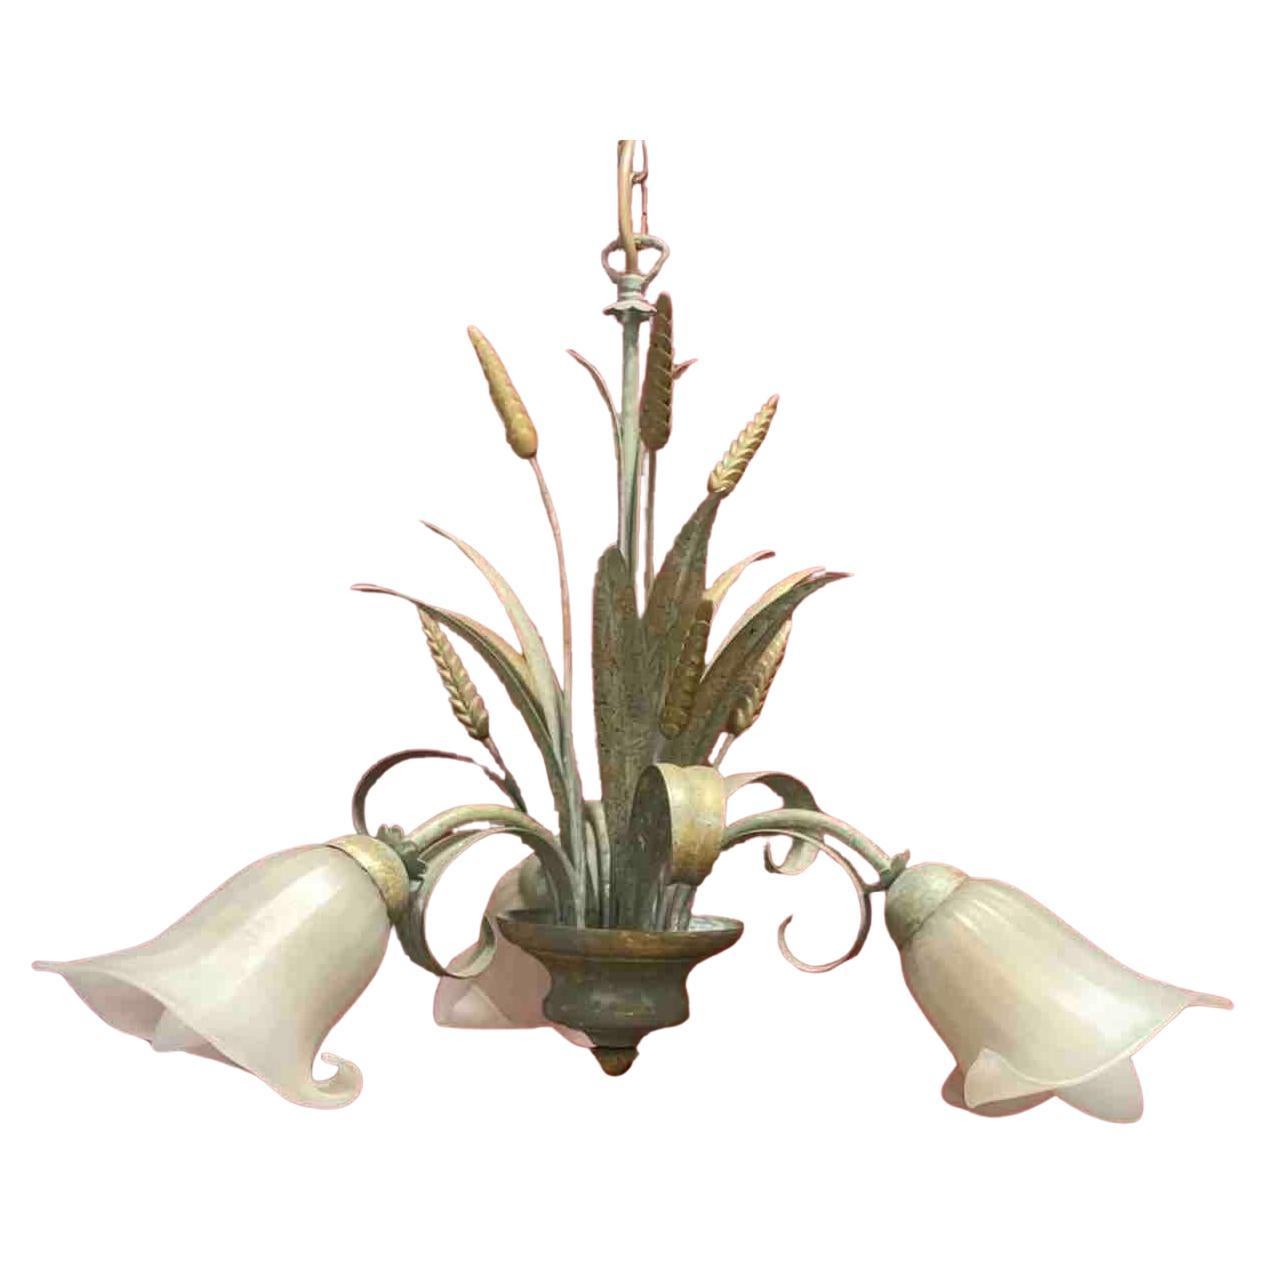 Hollywood Regency Metal & Glass Shade Wheat Sheaf Chandelier Tole Toleware Coco Chanel Style For Sale